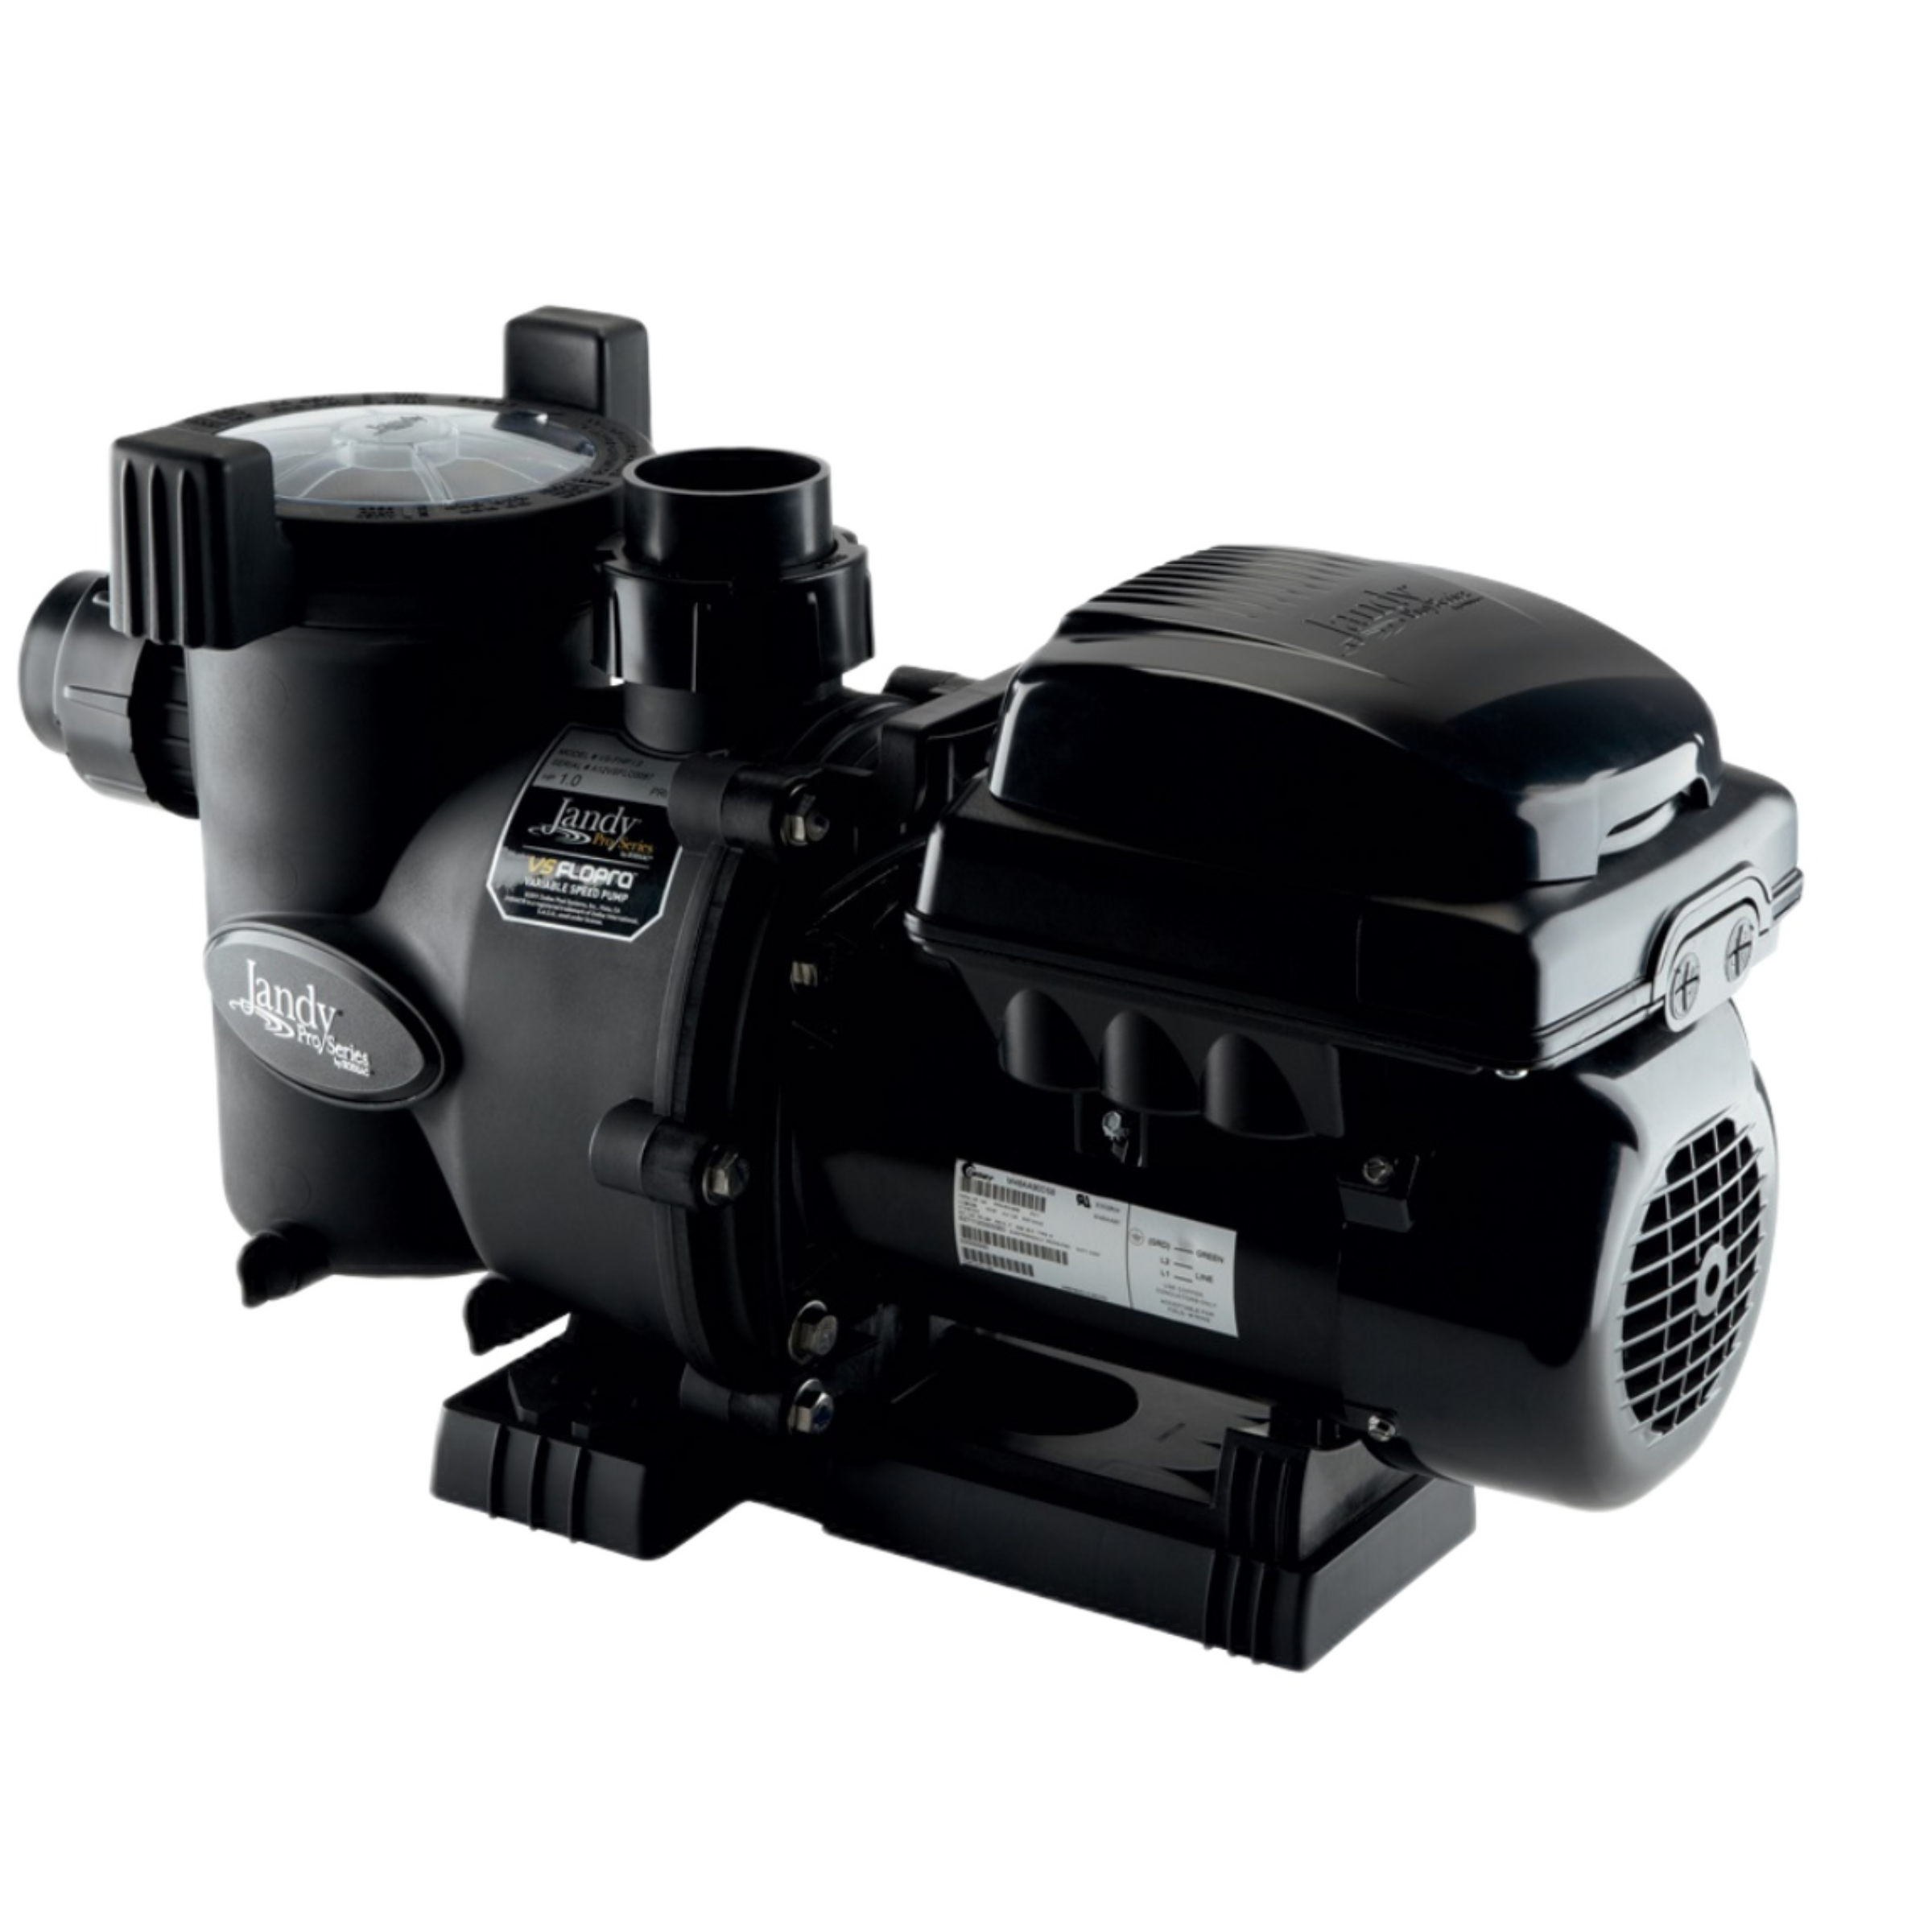 VSFHP165AUT Jandy VS Inground 1.65 HP Variable-Speed FloPro Pump w/o Controller for In-Ground Pools or In-Ground Spas